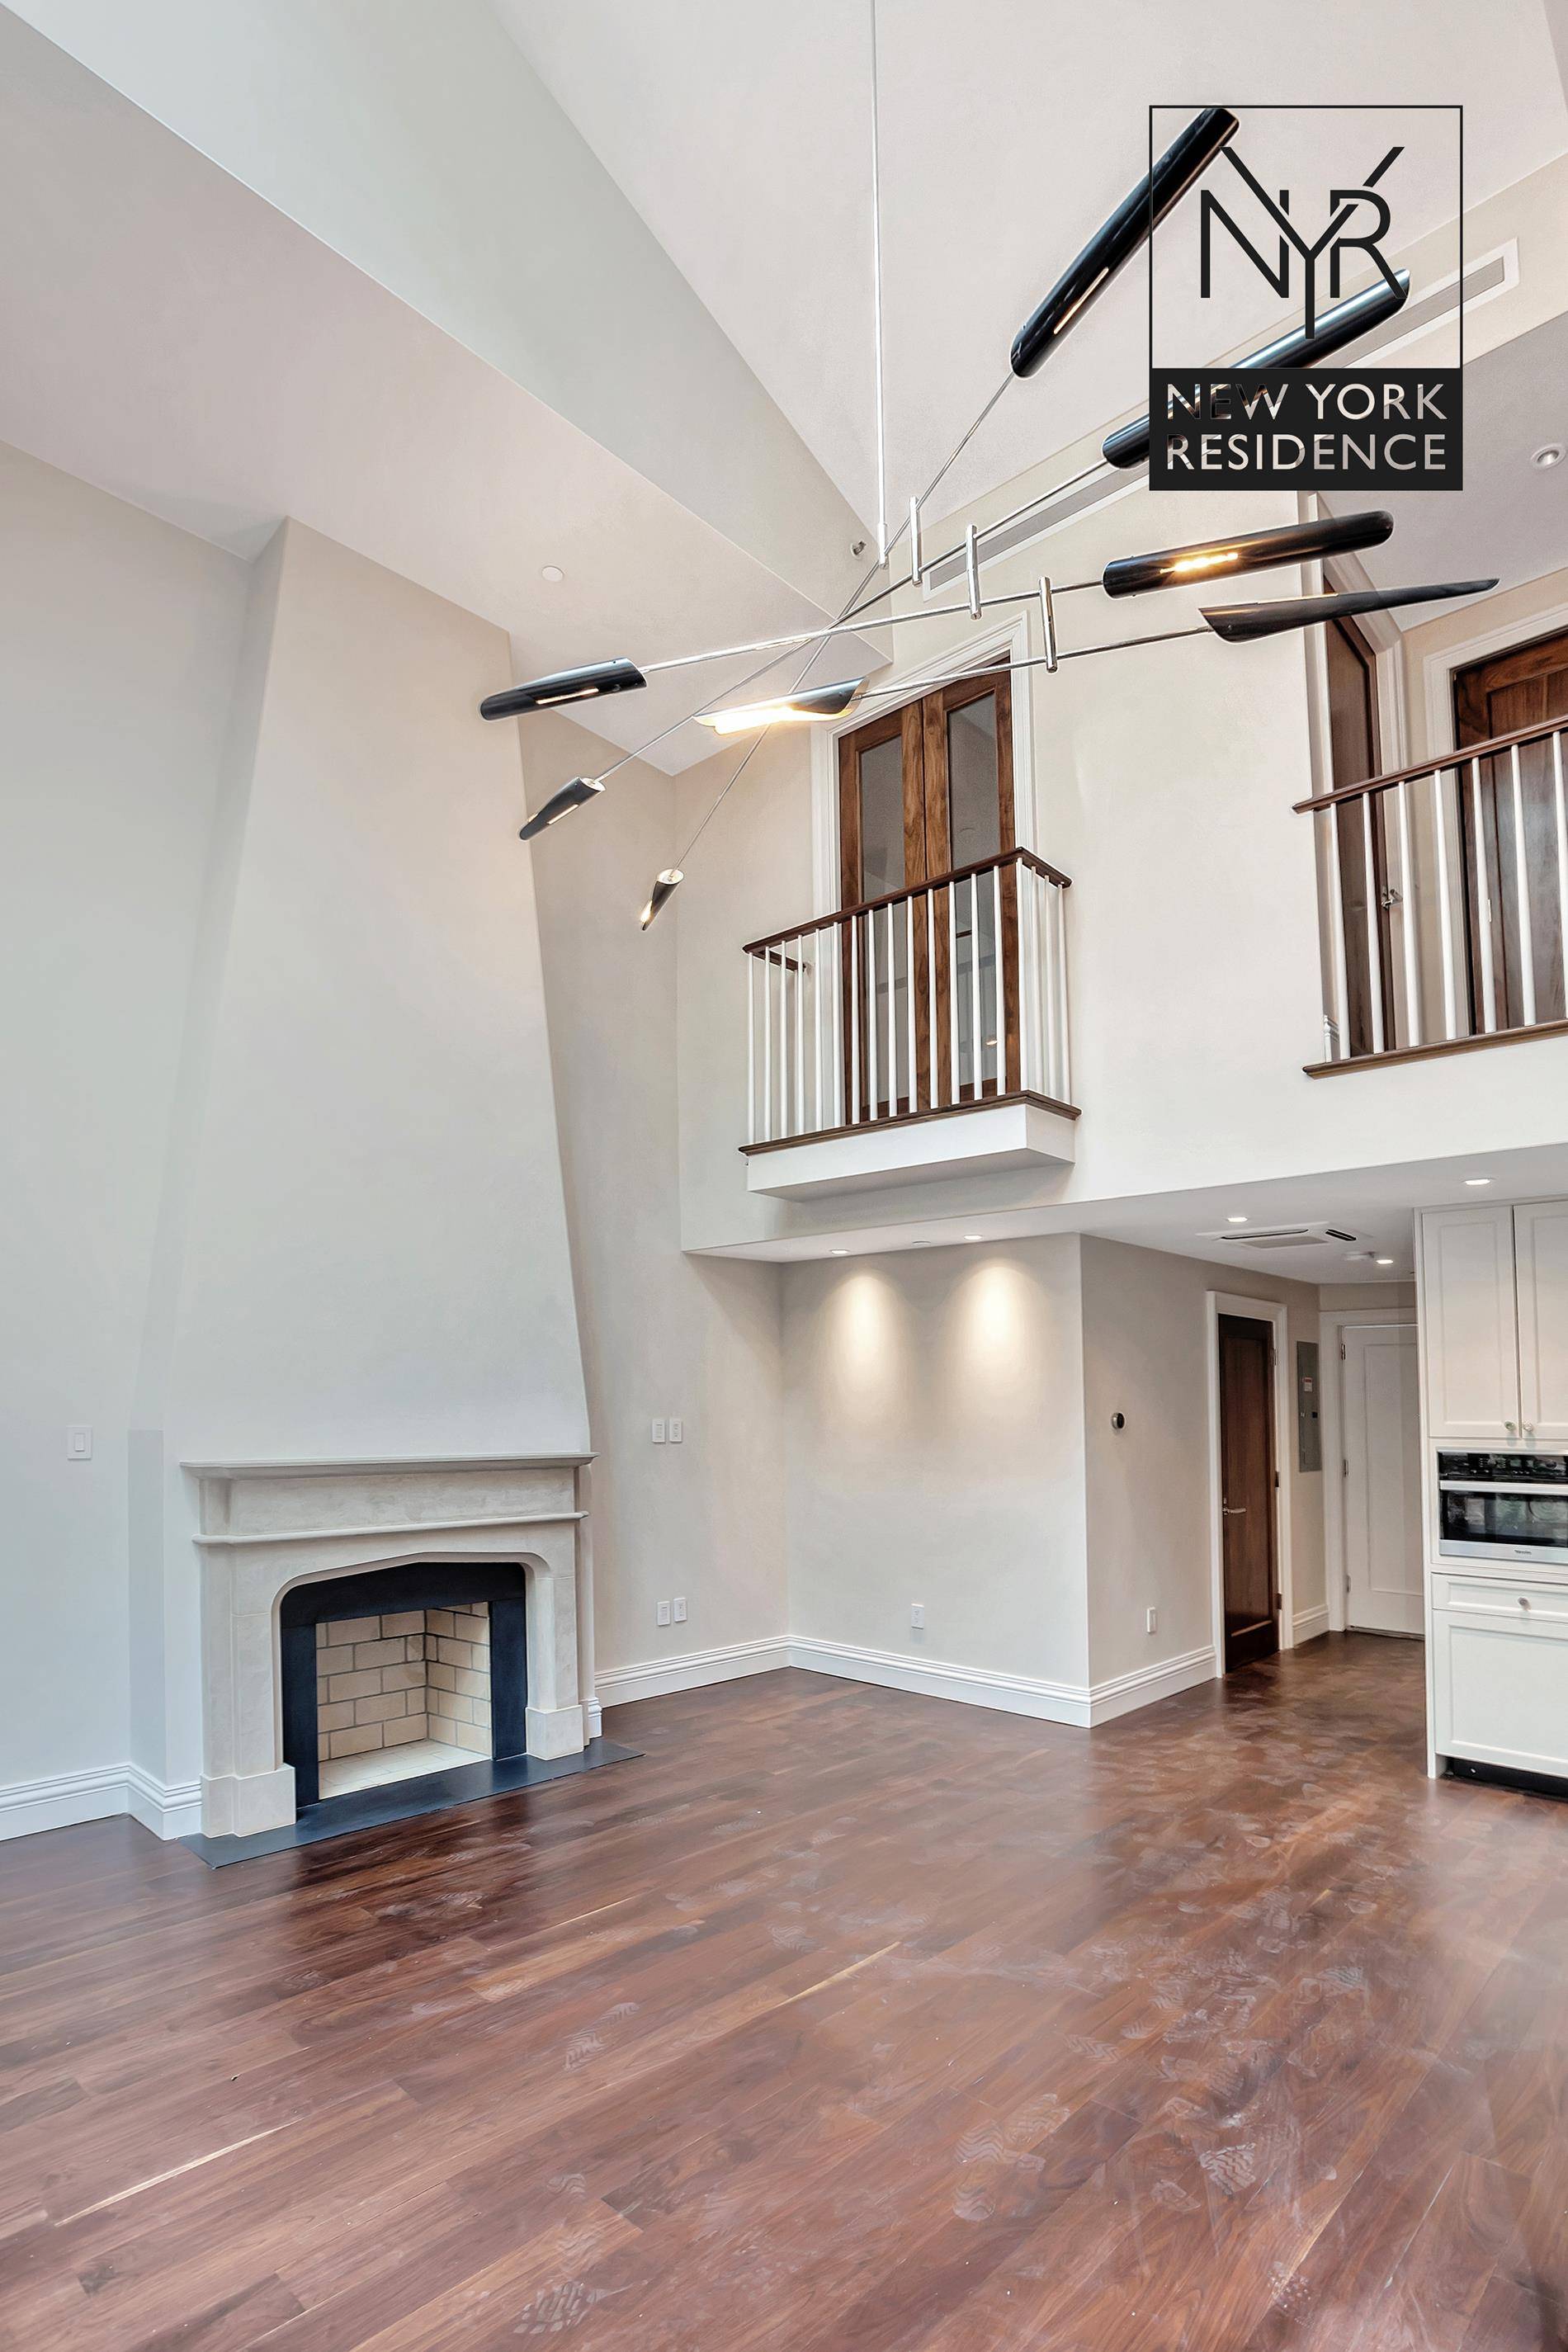 This is a listing for the opportunity to rent both the Carriage House 6 AND the One Bedroom Apartment 1 together with the internal garden that connects them.